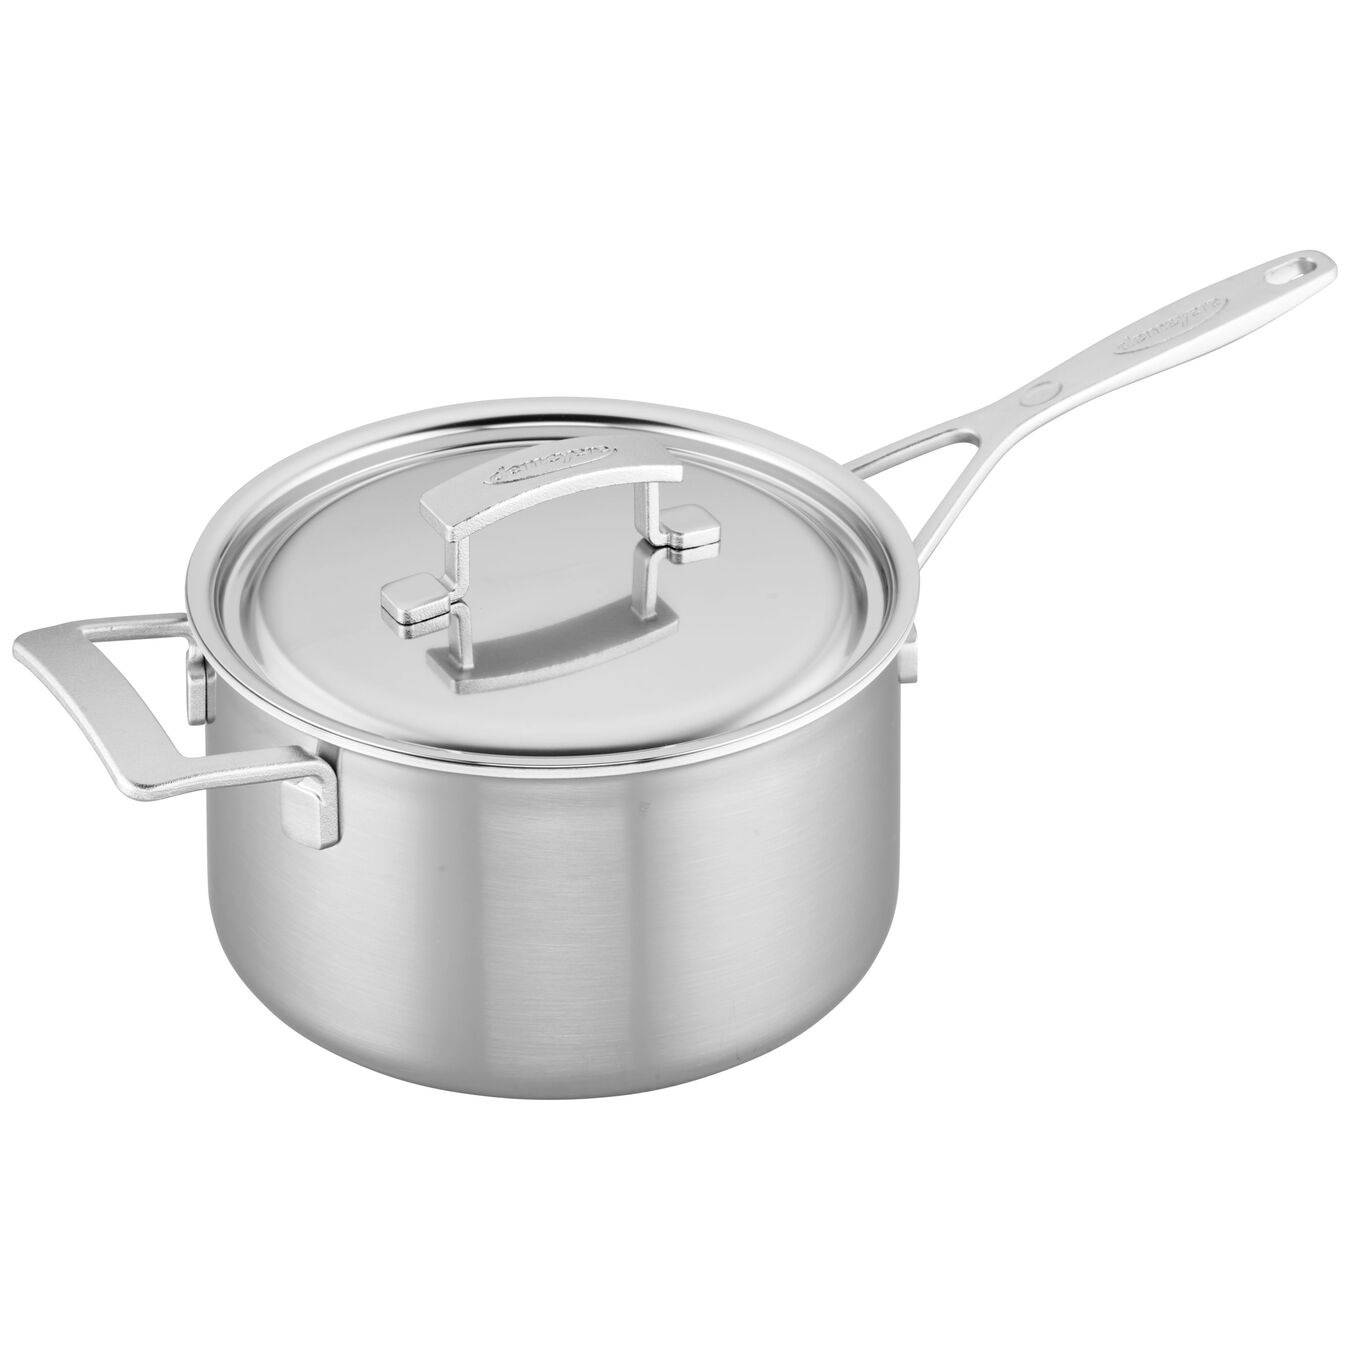 4 qt Saucepan with Helper Handle and lid, 18/10 Stainless Steel ,,large 1